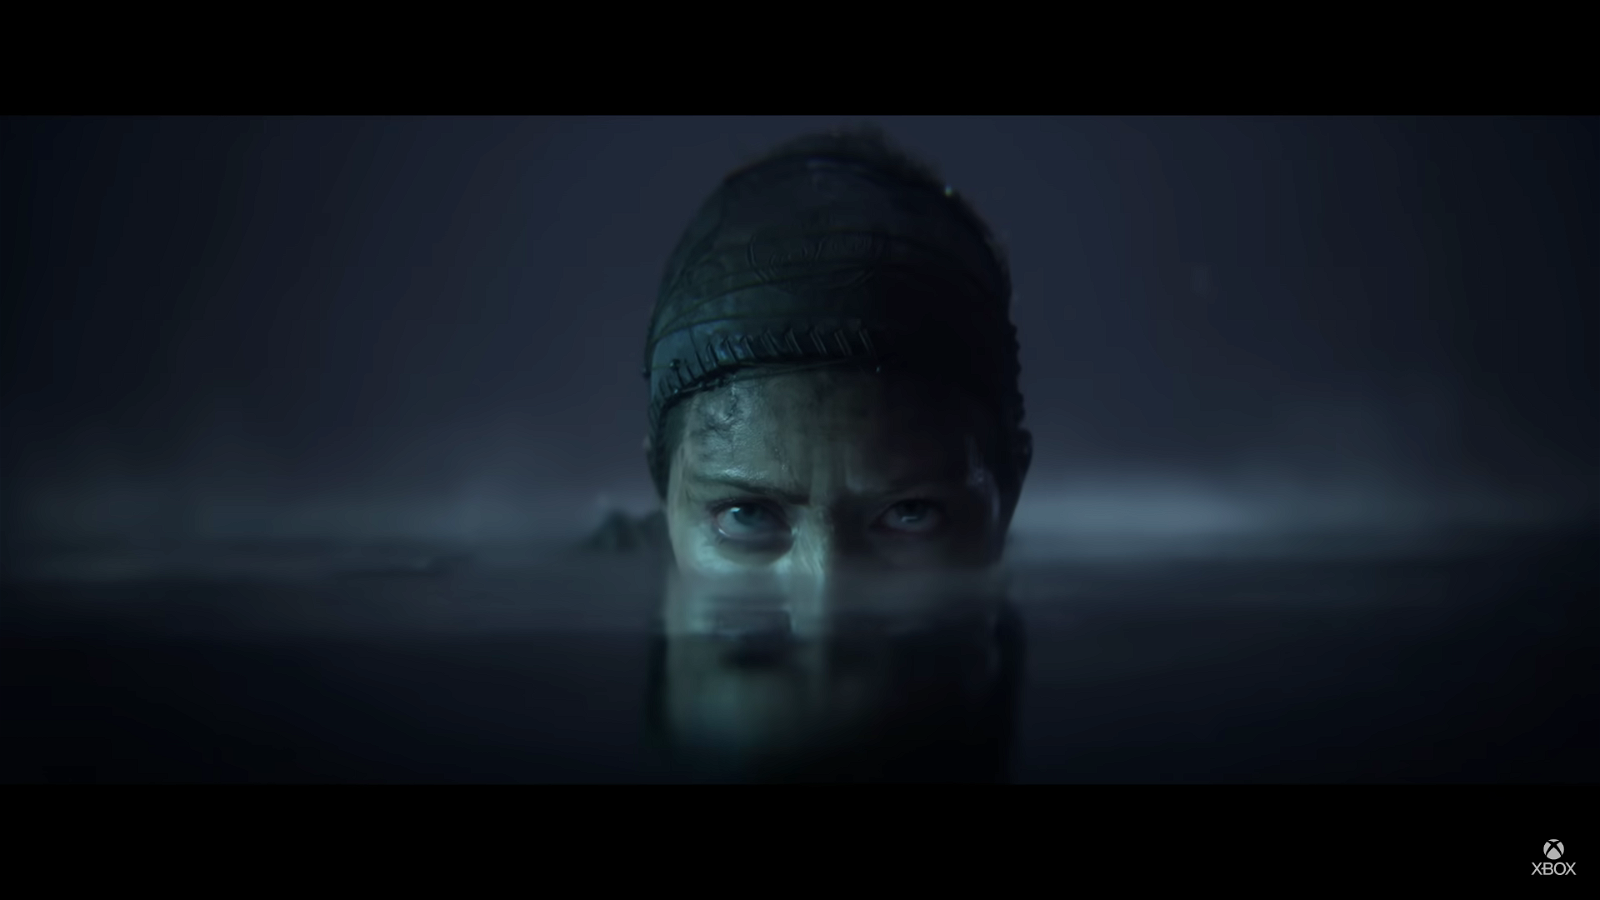 Initial impressions have called Hellblade 2 highly immersive, making the studio's efforts worthwhile.